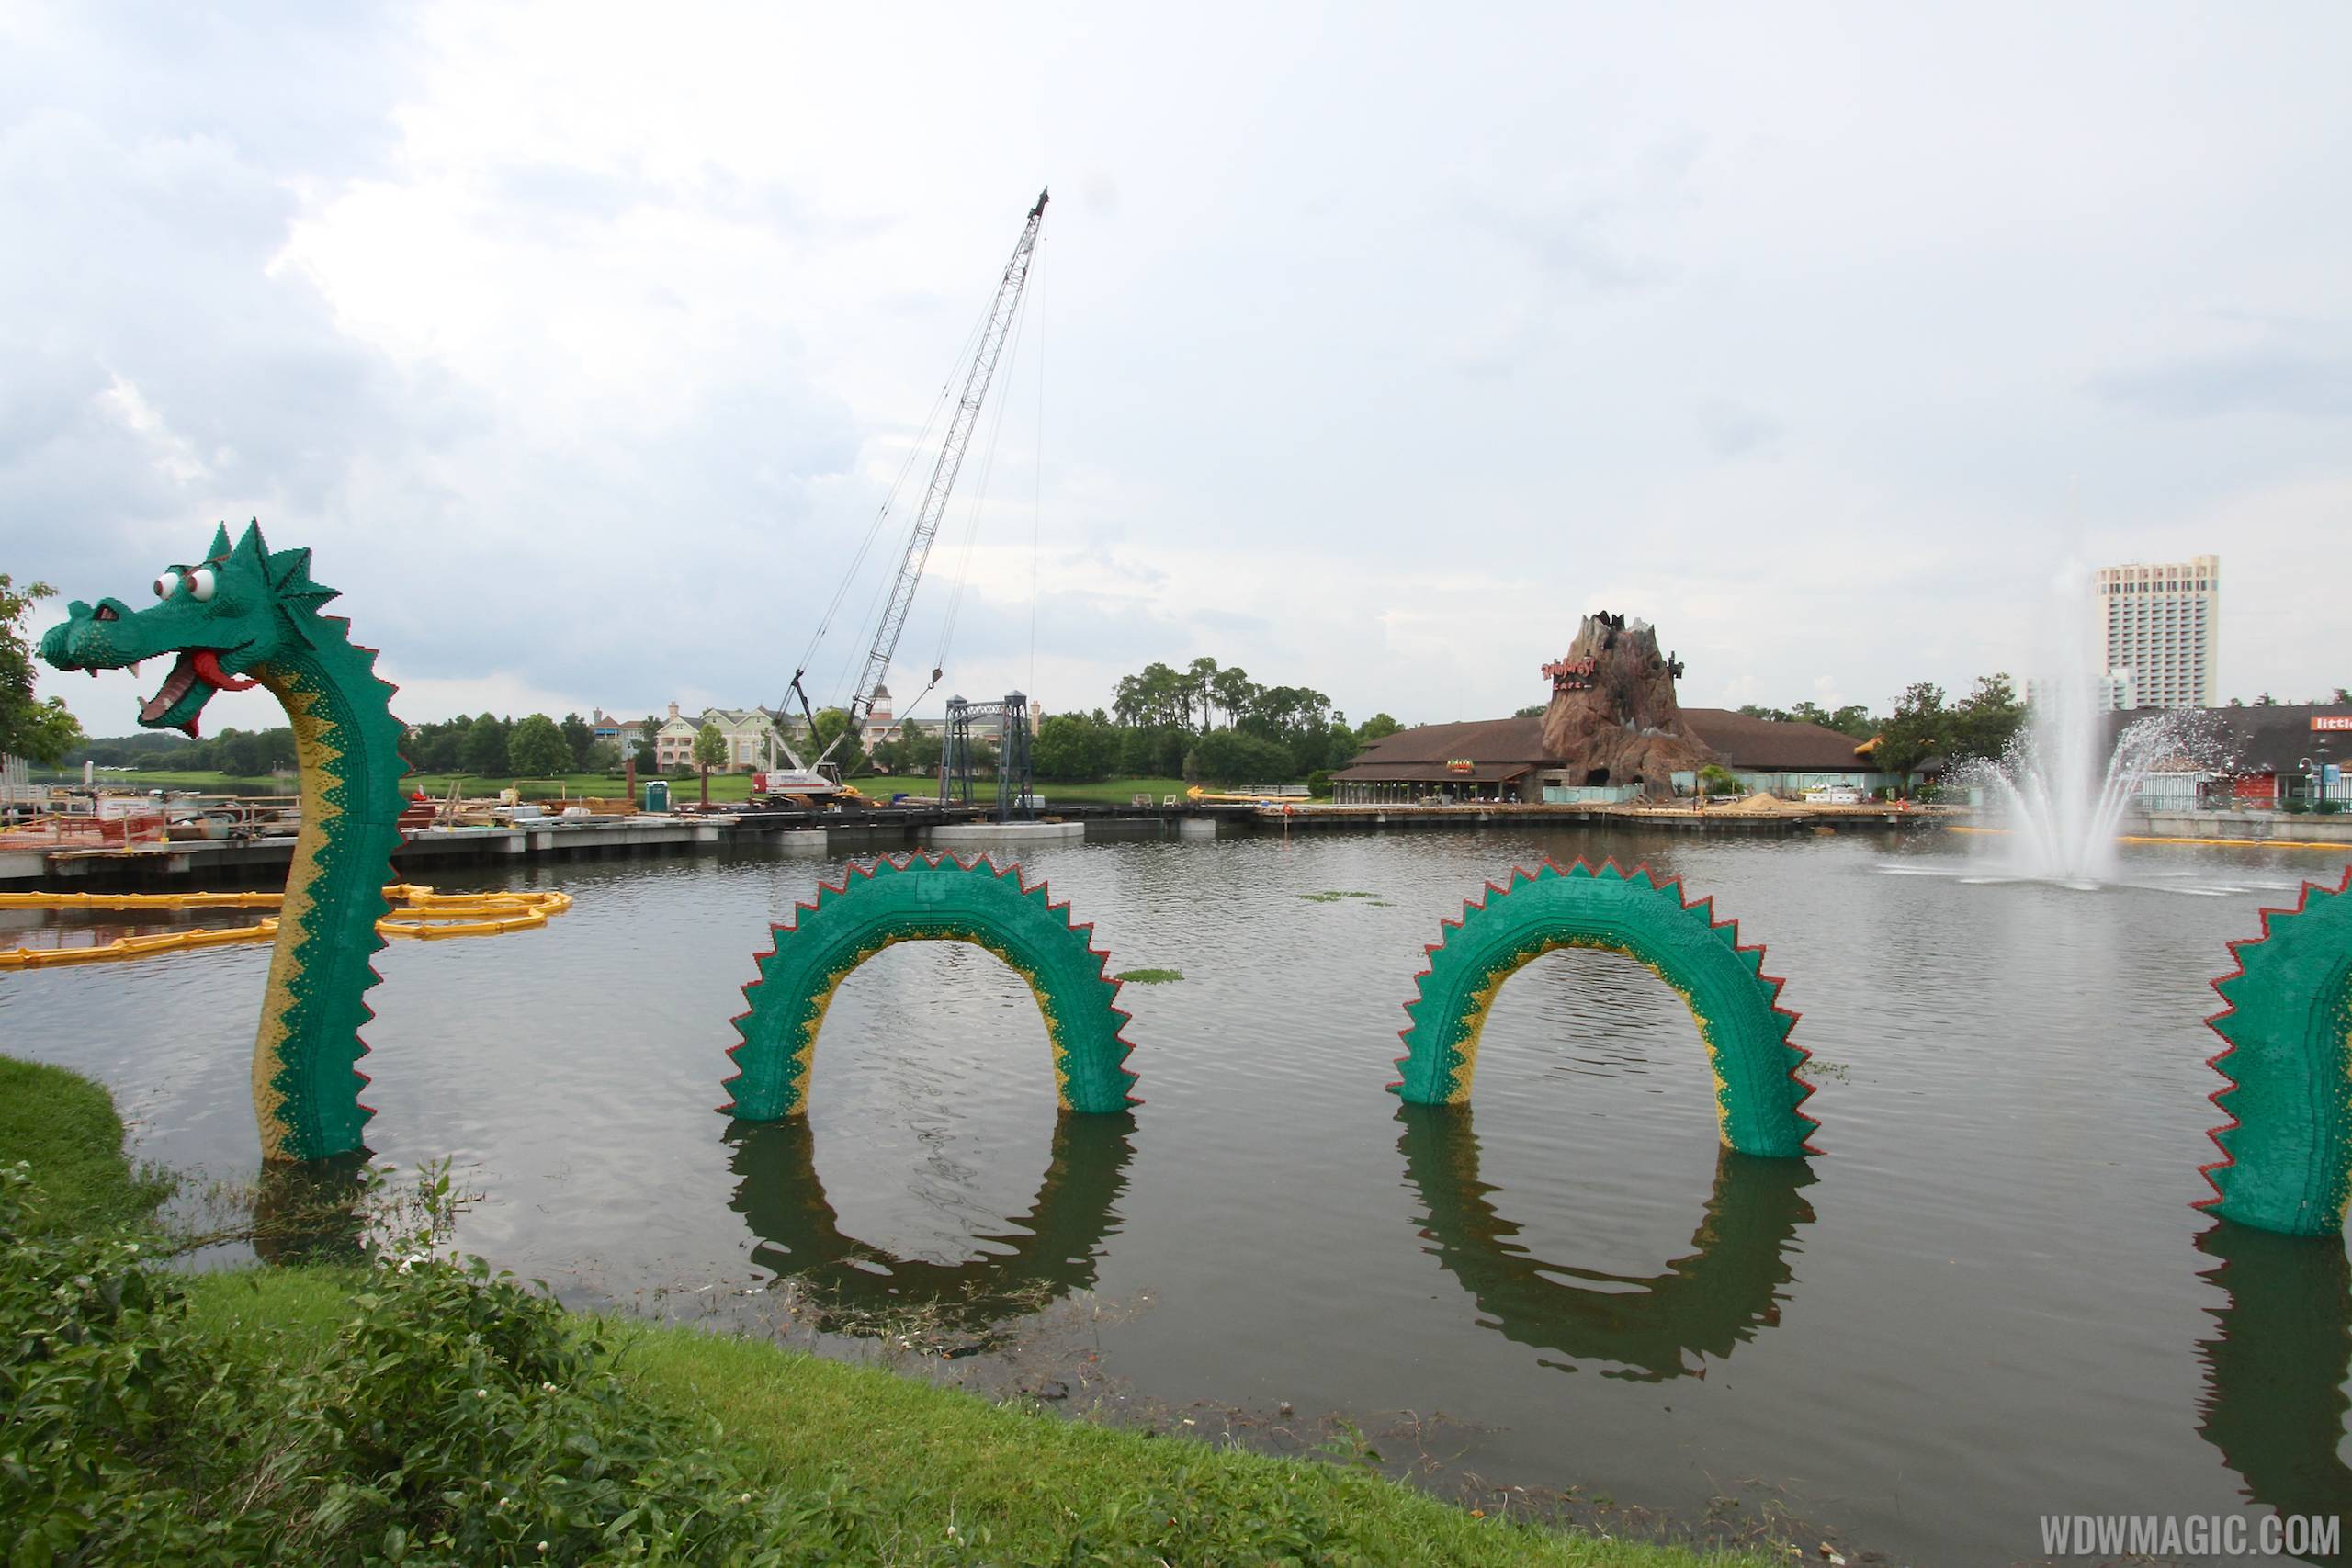 PHOTOS - New fountain and steel work goes up on Disney Springs Marketplace Causeway